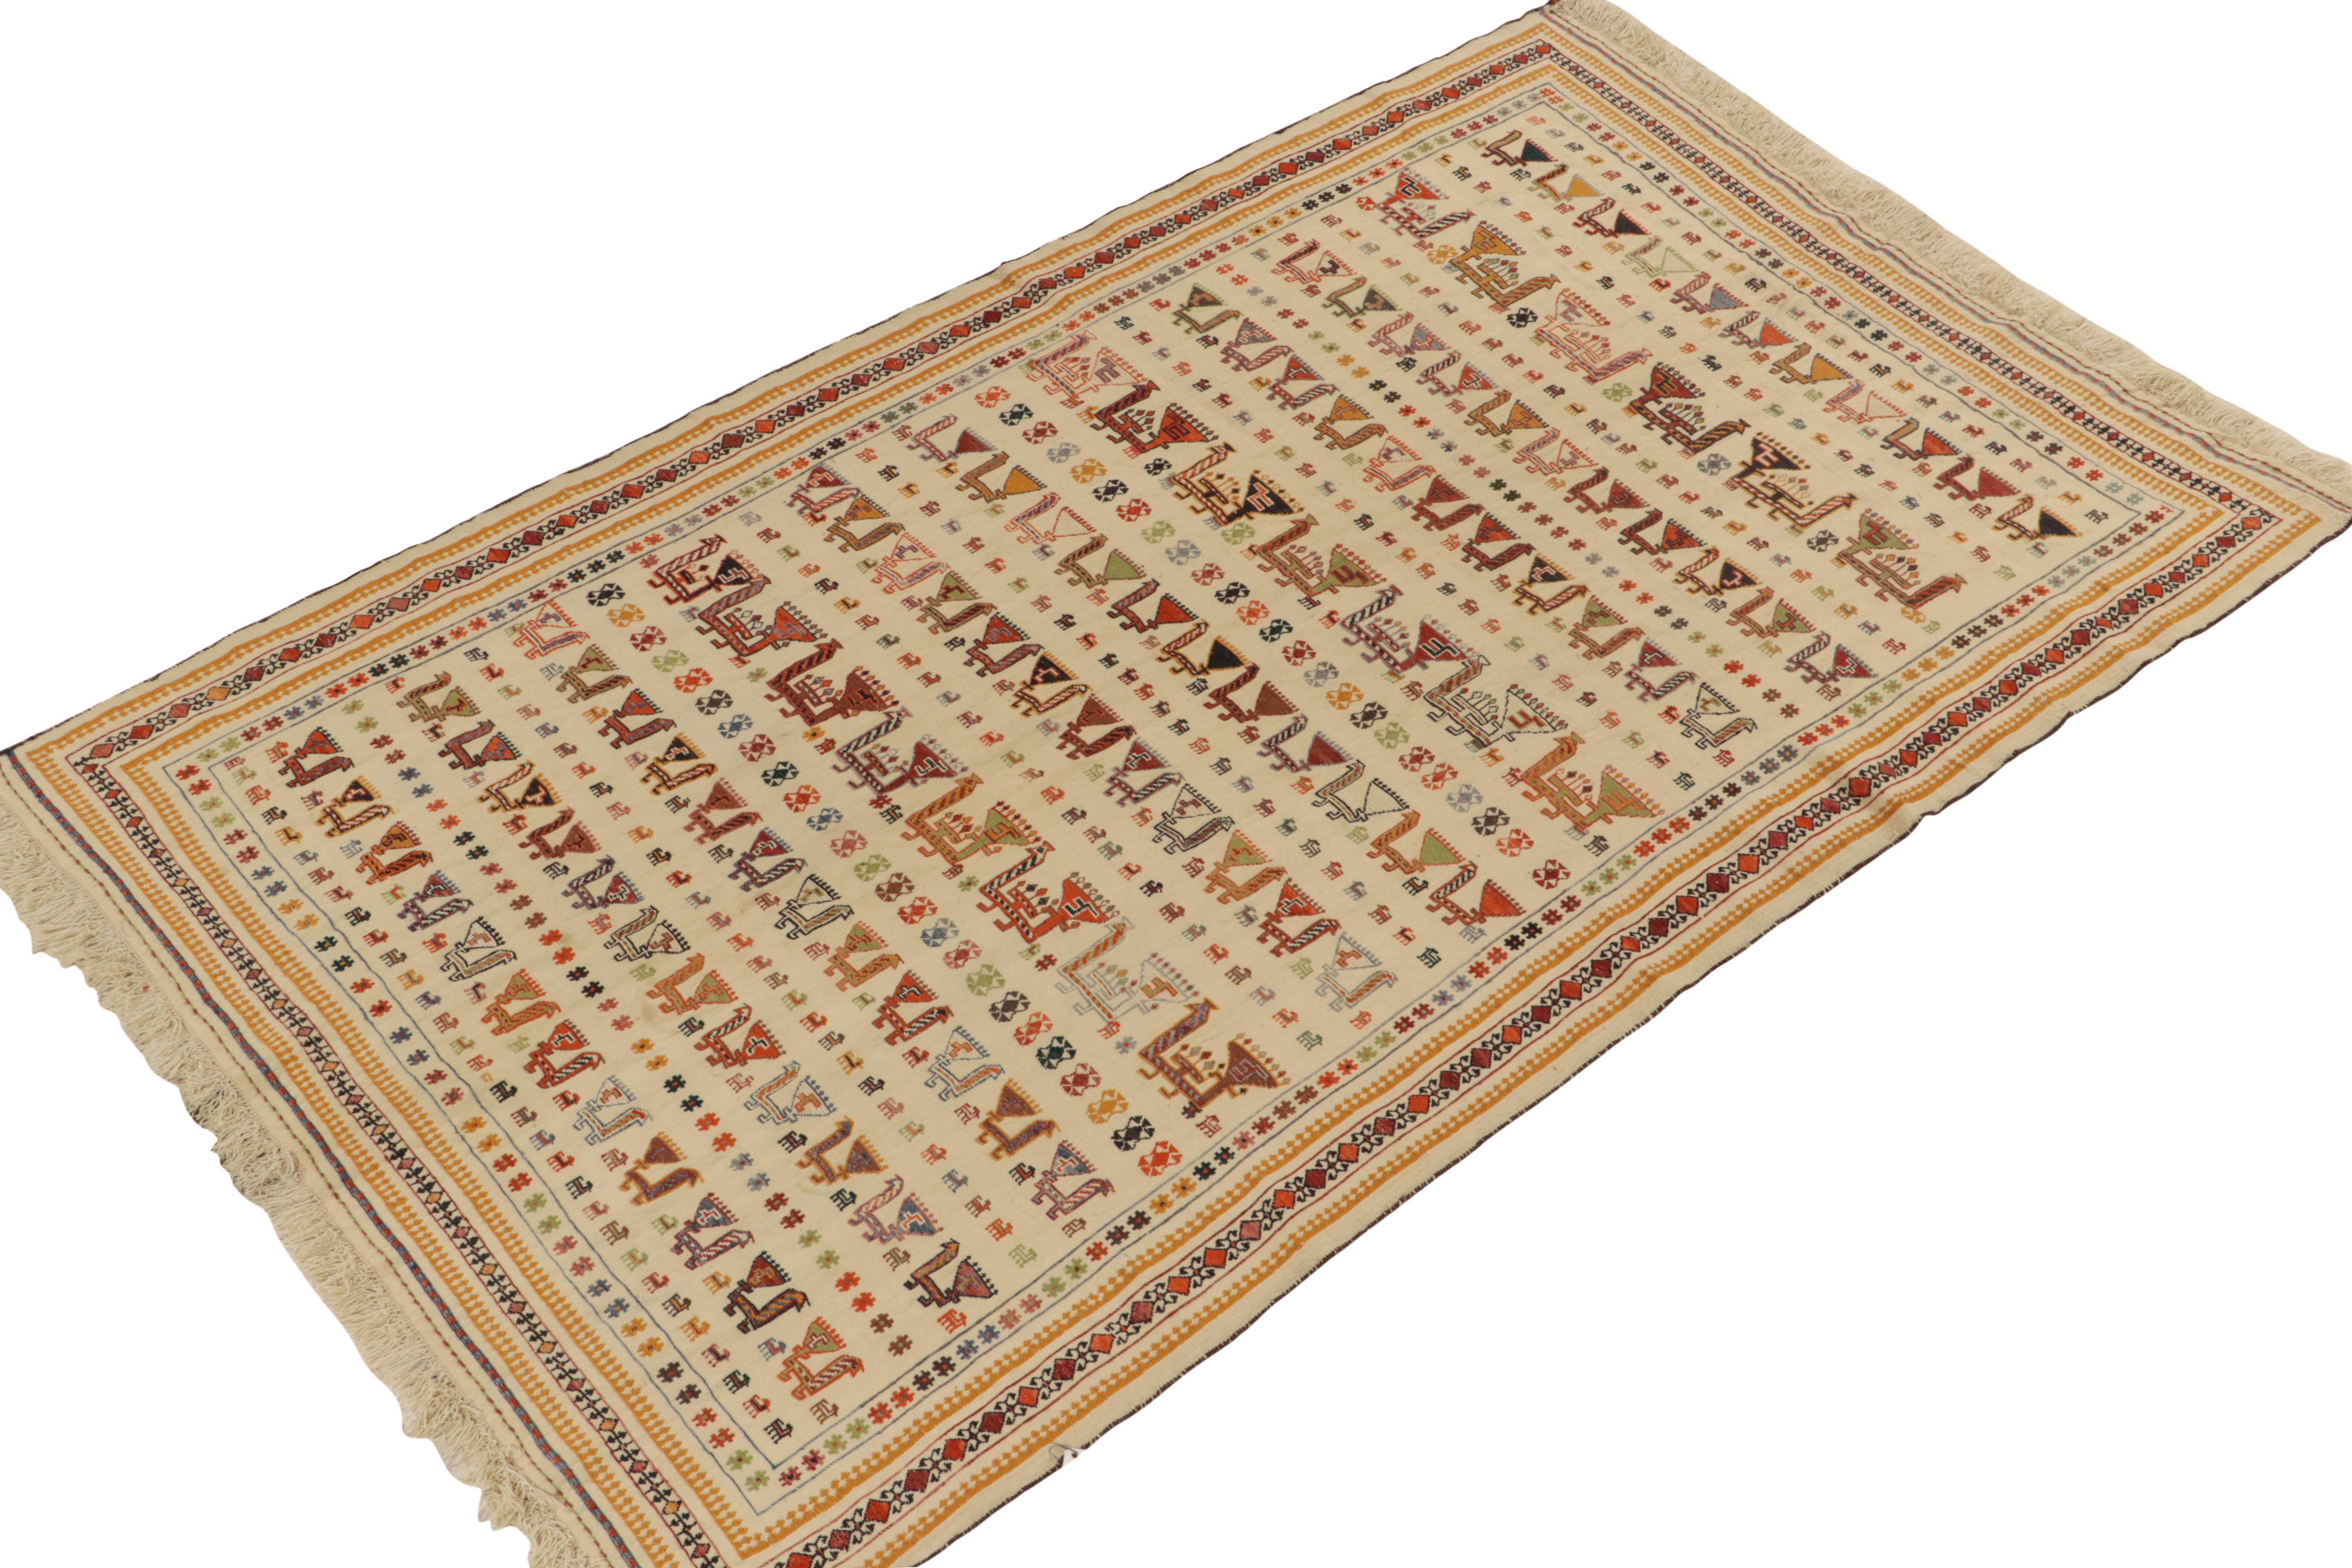 Handwoven in wool circa 1920-1930, a 5x8 antique Verneh kilim rug among our most coveted curations of masterful Persian rugs. 

The colorful piece enjoys meticulously detailed motifs in rows that grab the eye against the forgiving, cool beige